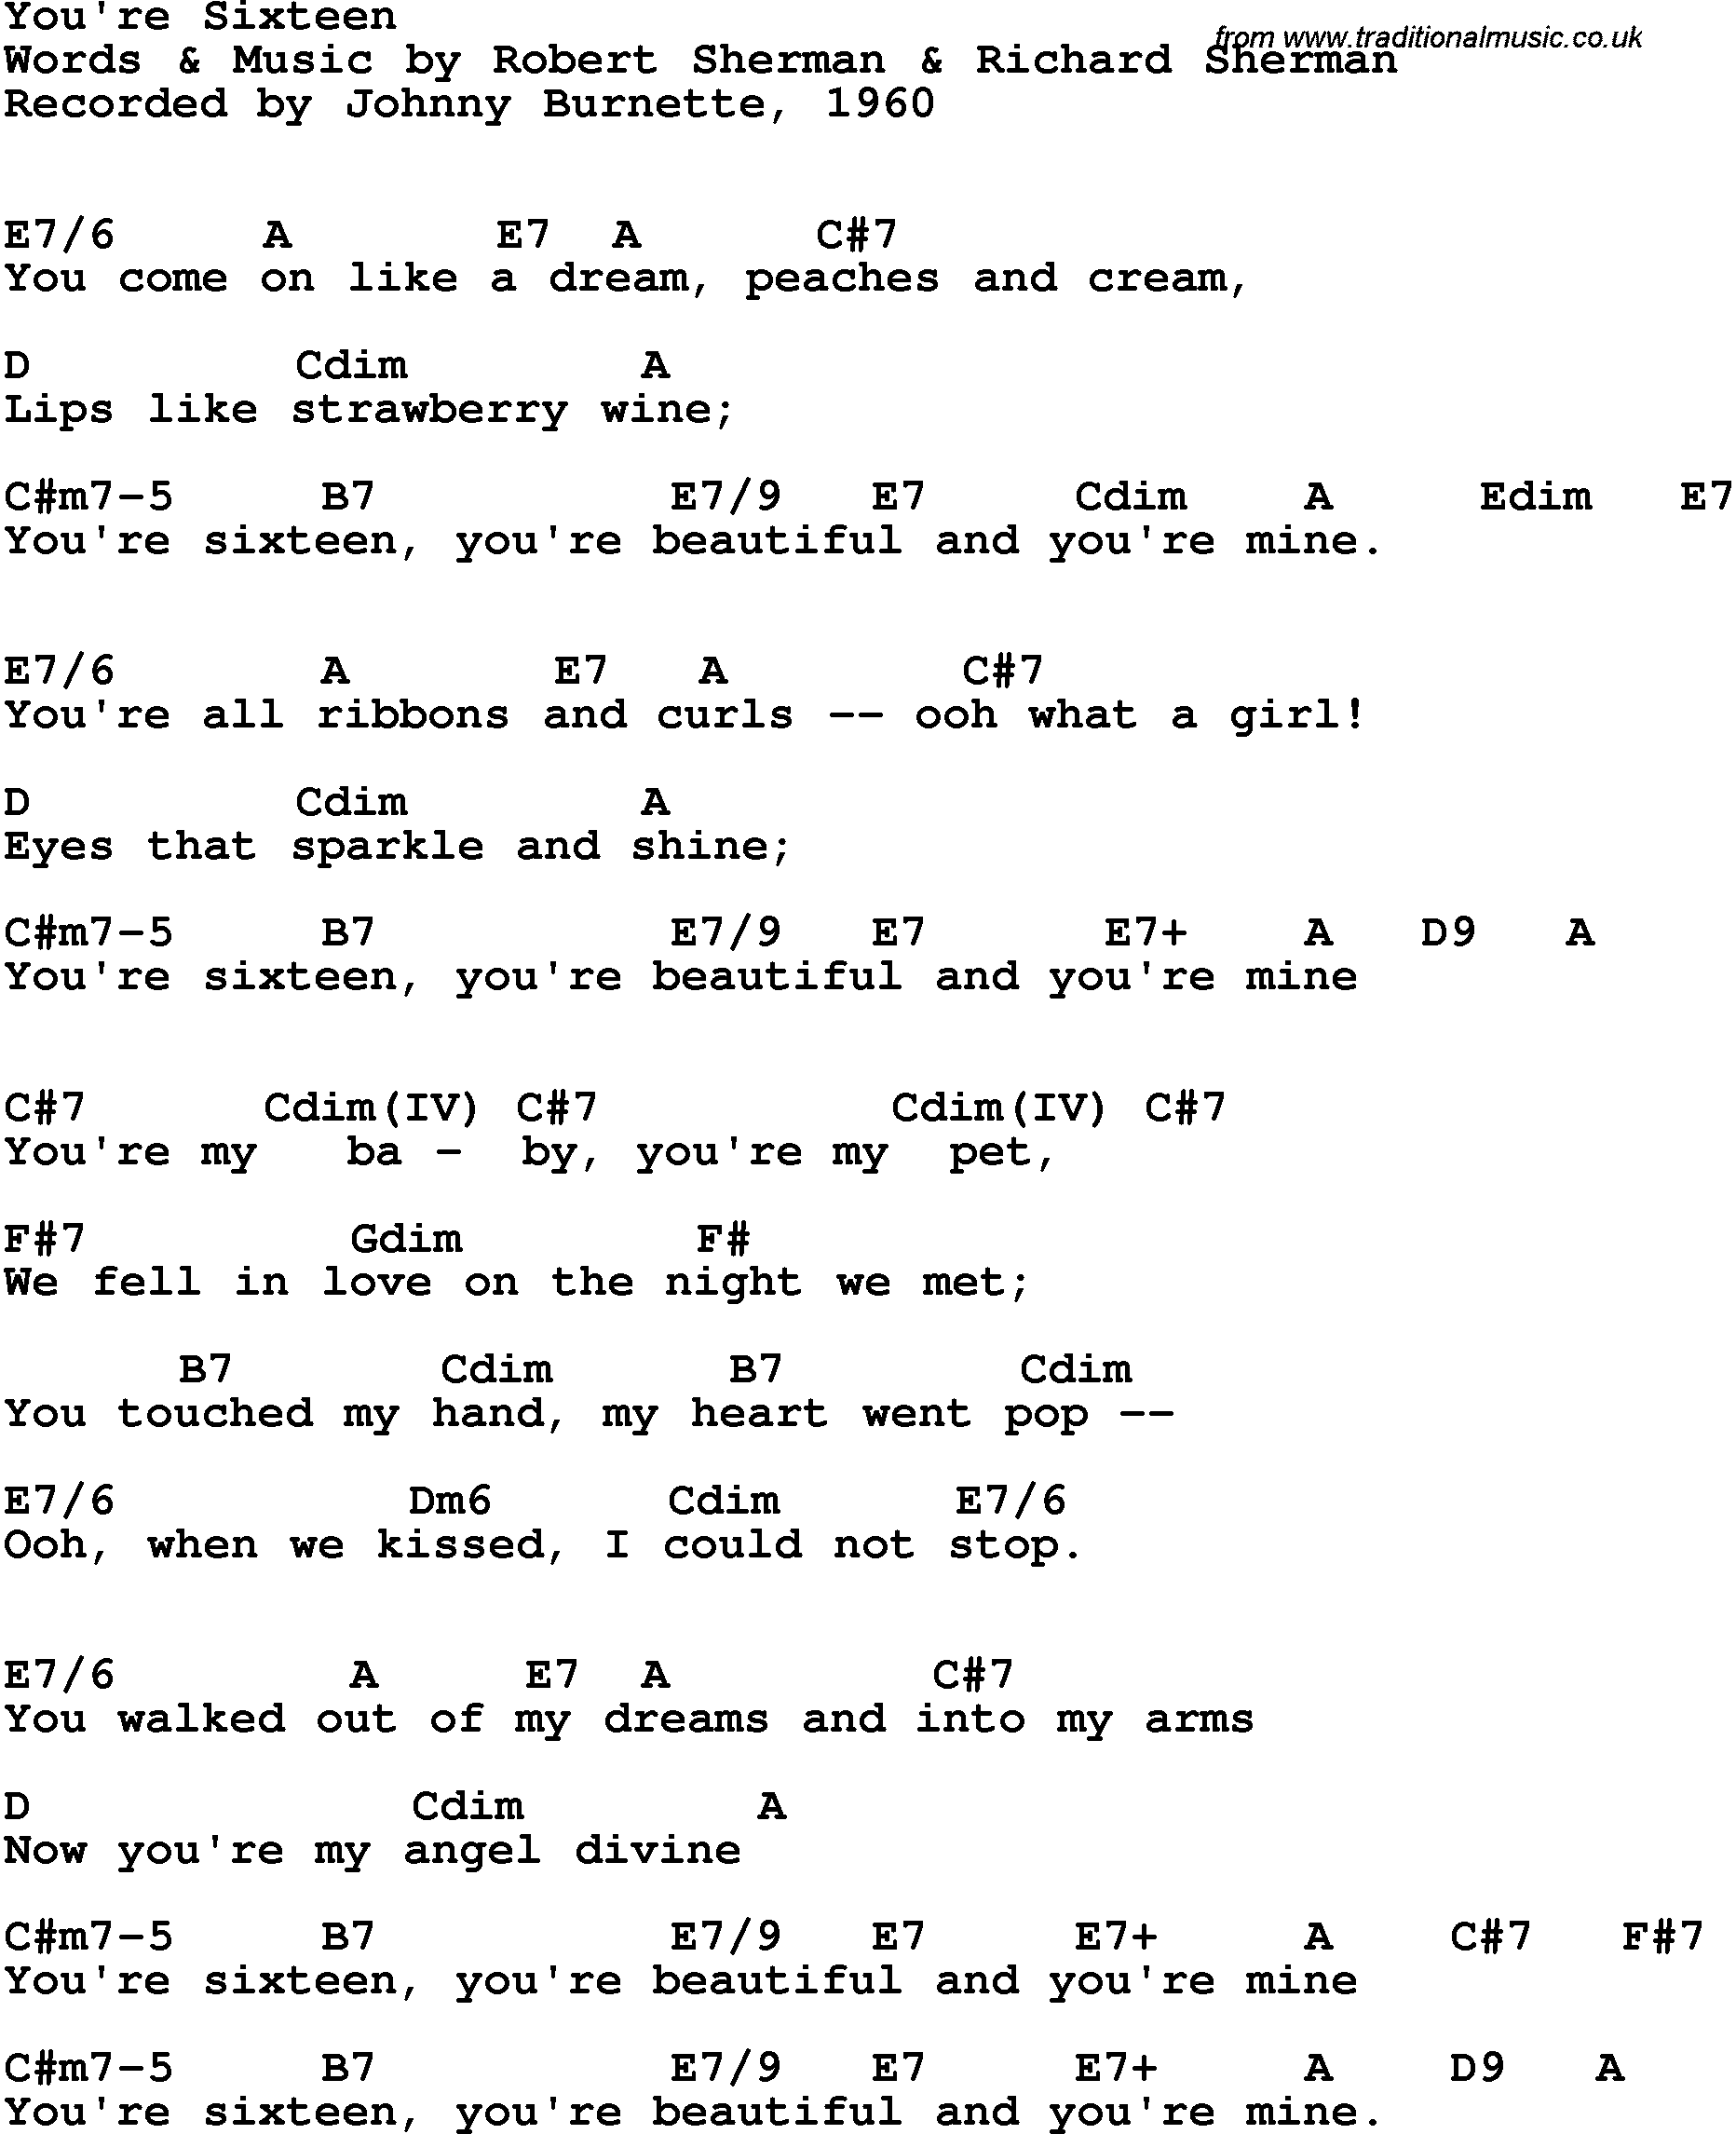 Song Lyrics with guitar chords for You're Sixteen - Johnny Burnette, 1960